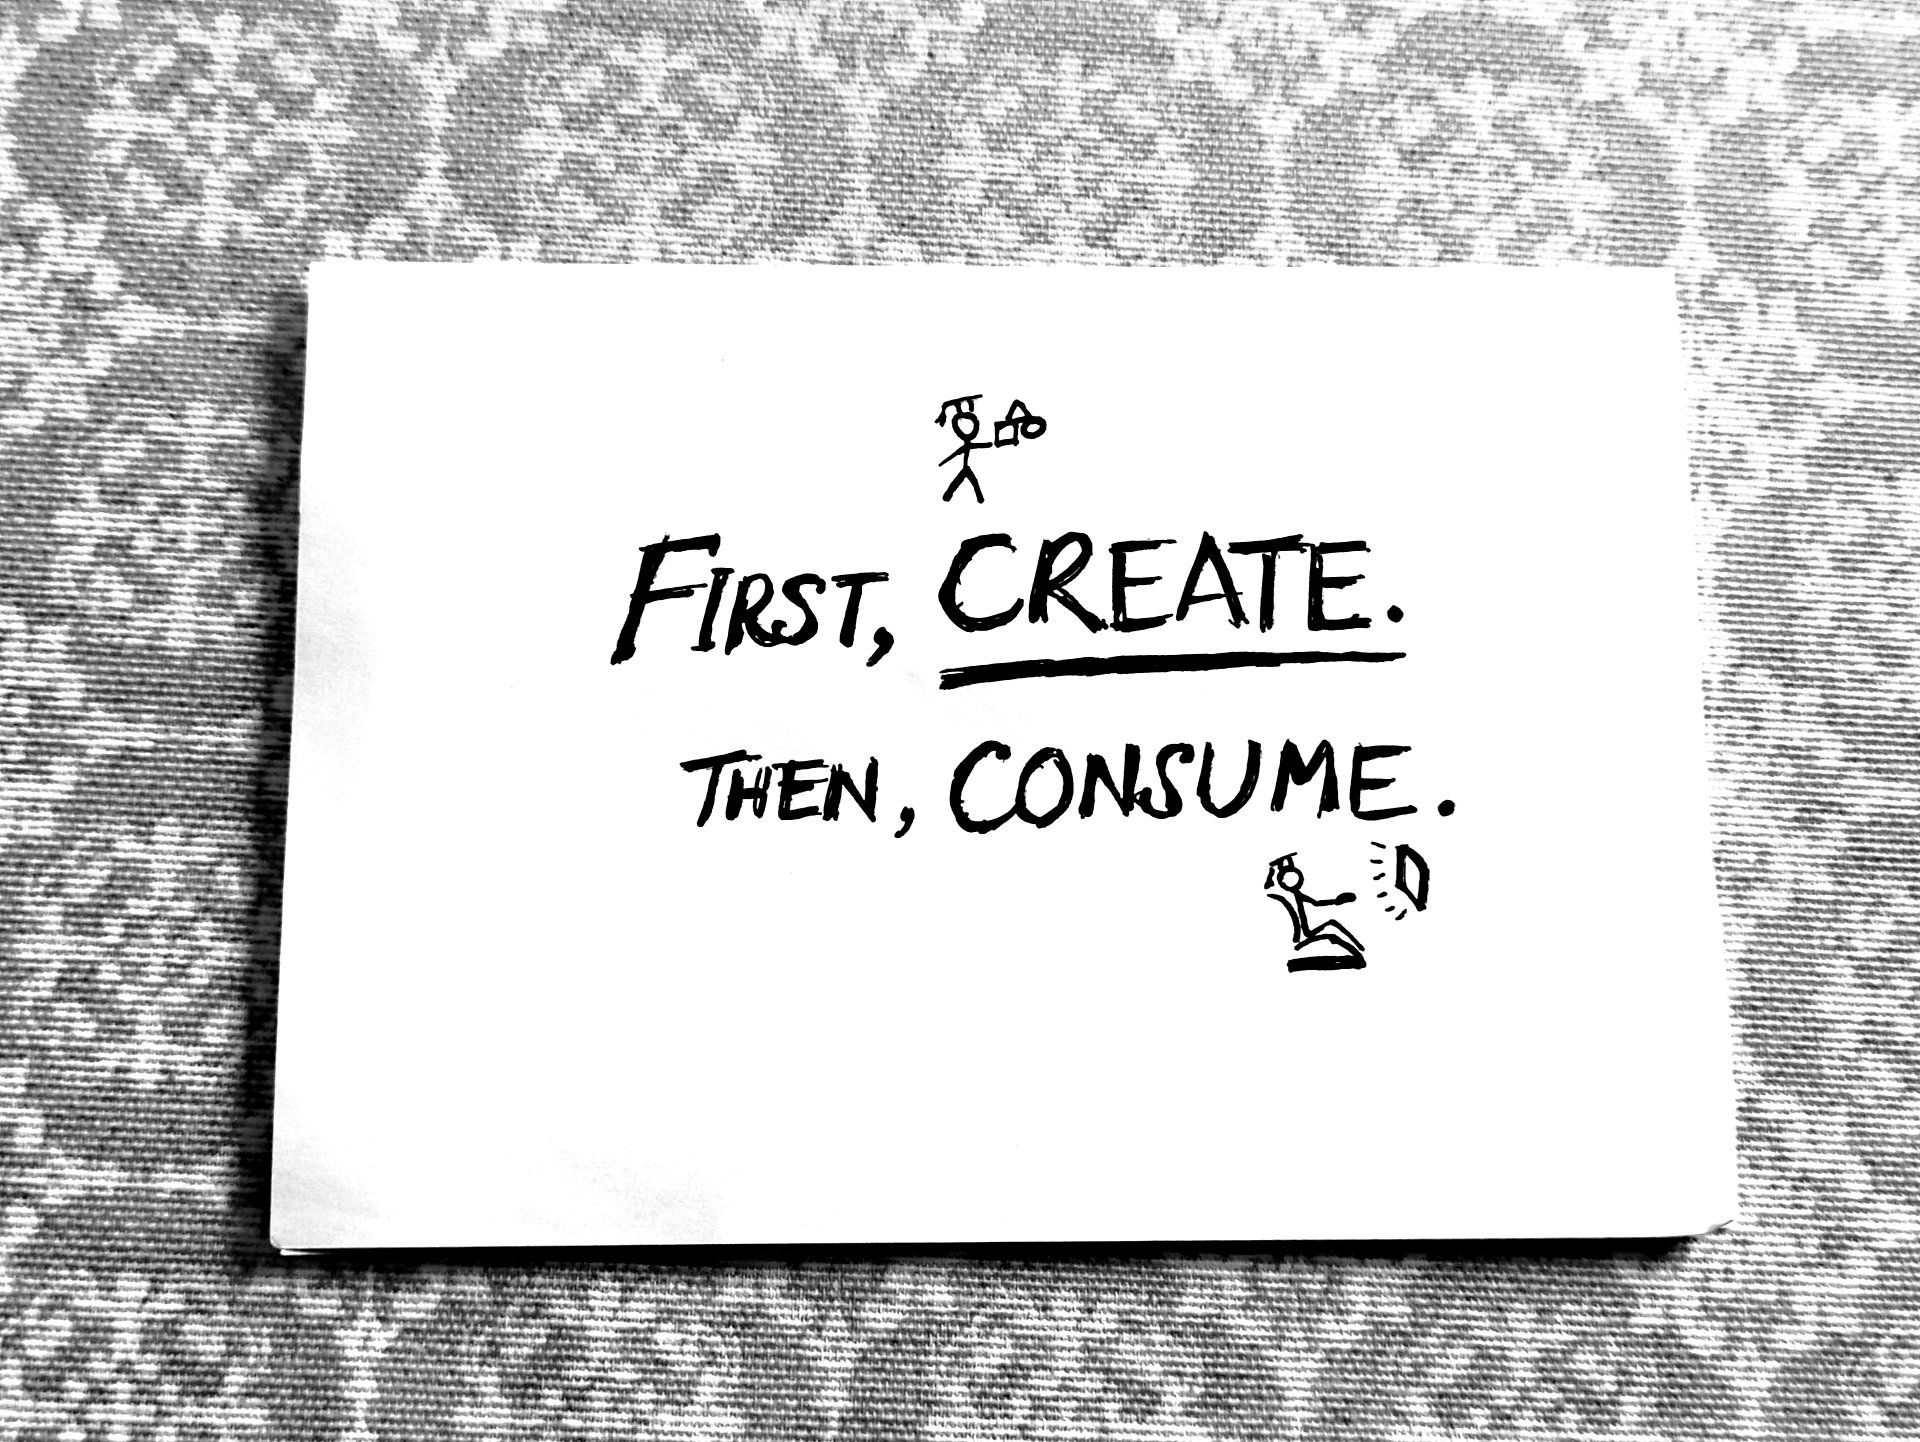 First create, then consume.